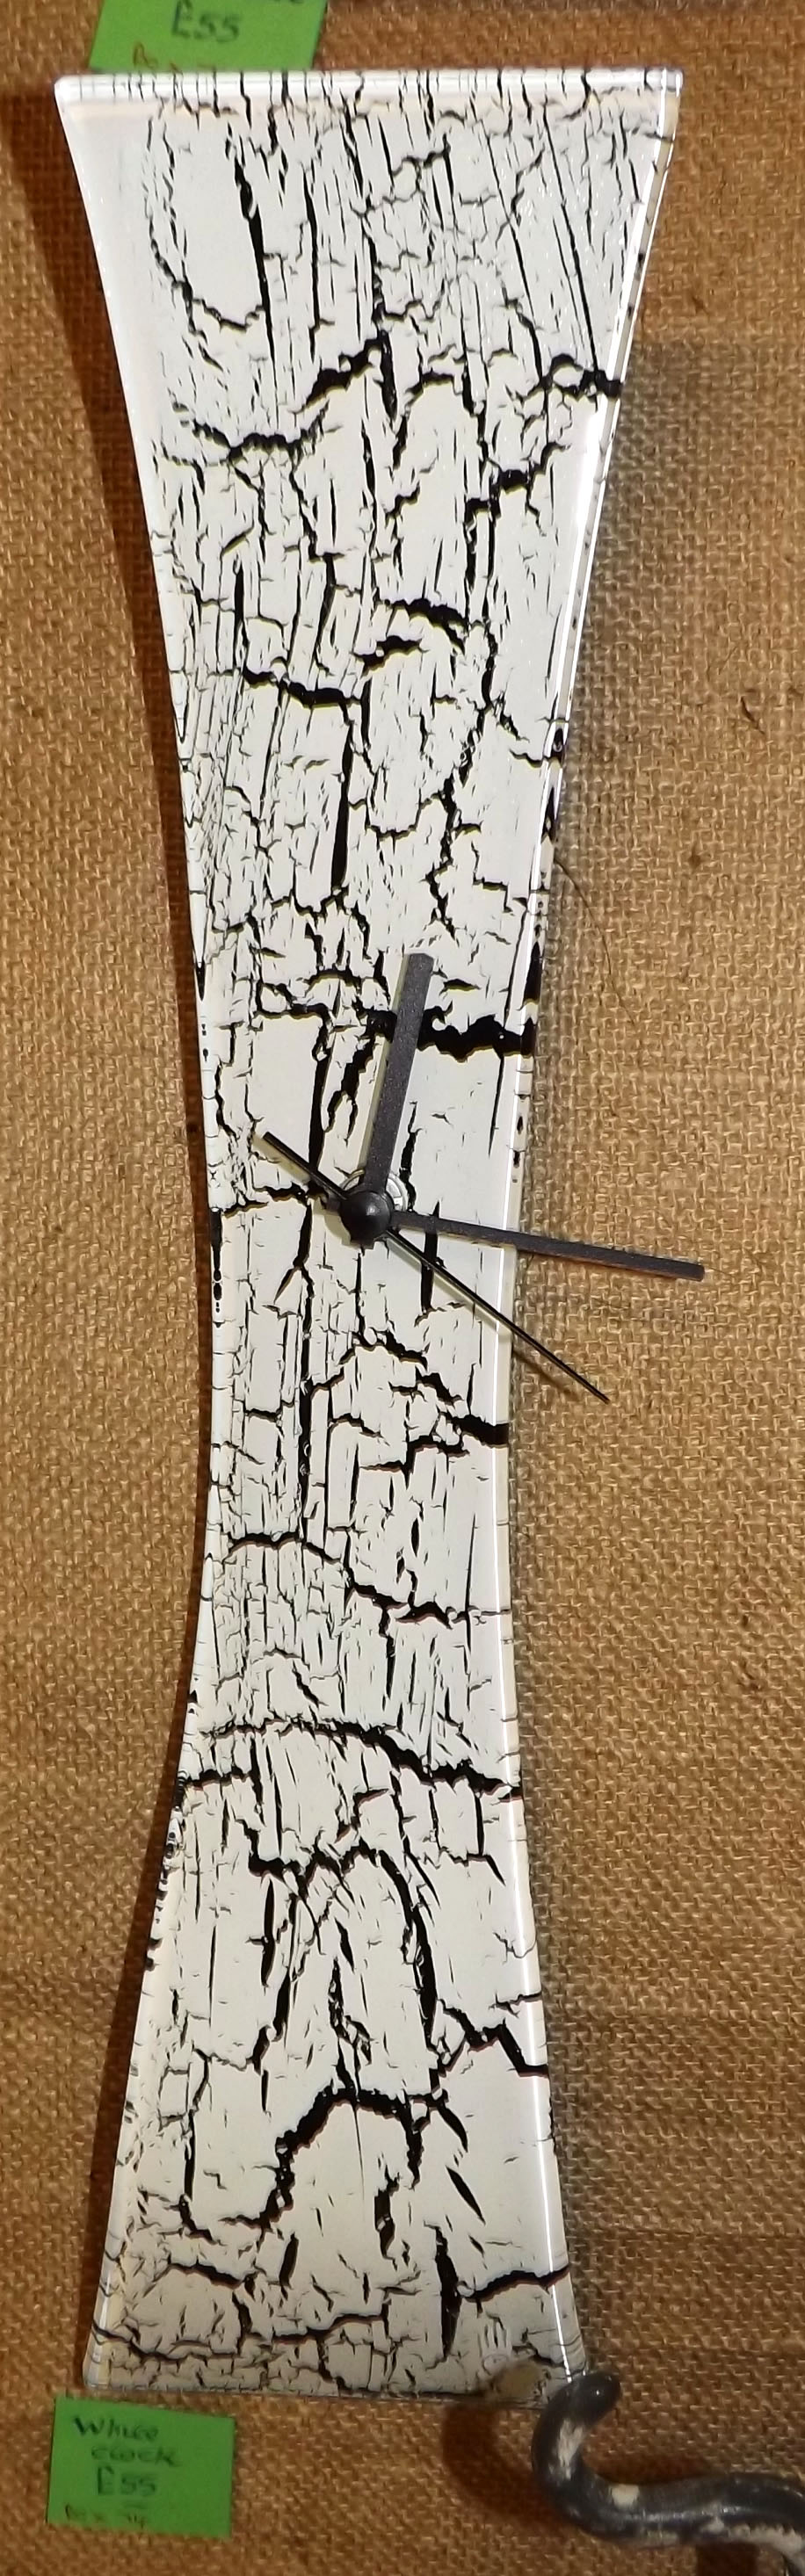 White clock with black crackles